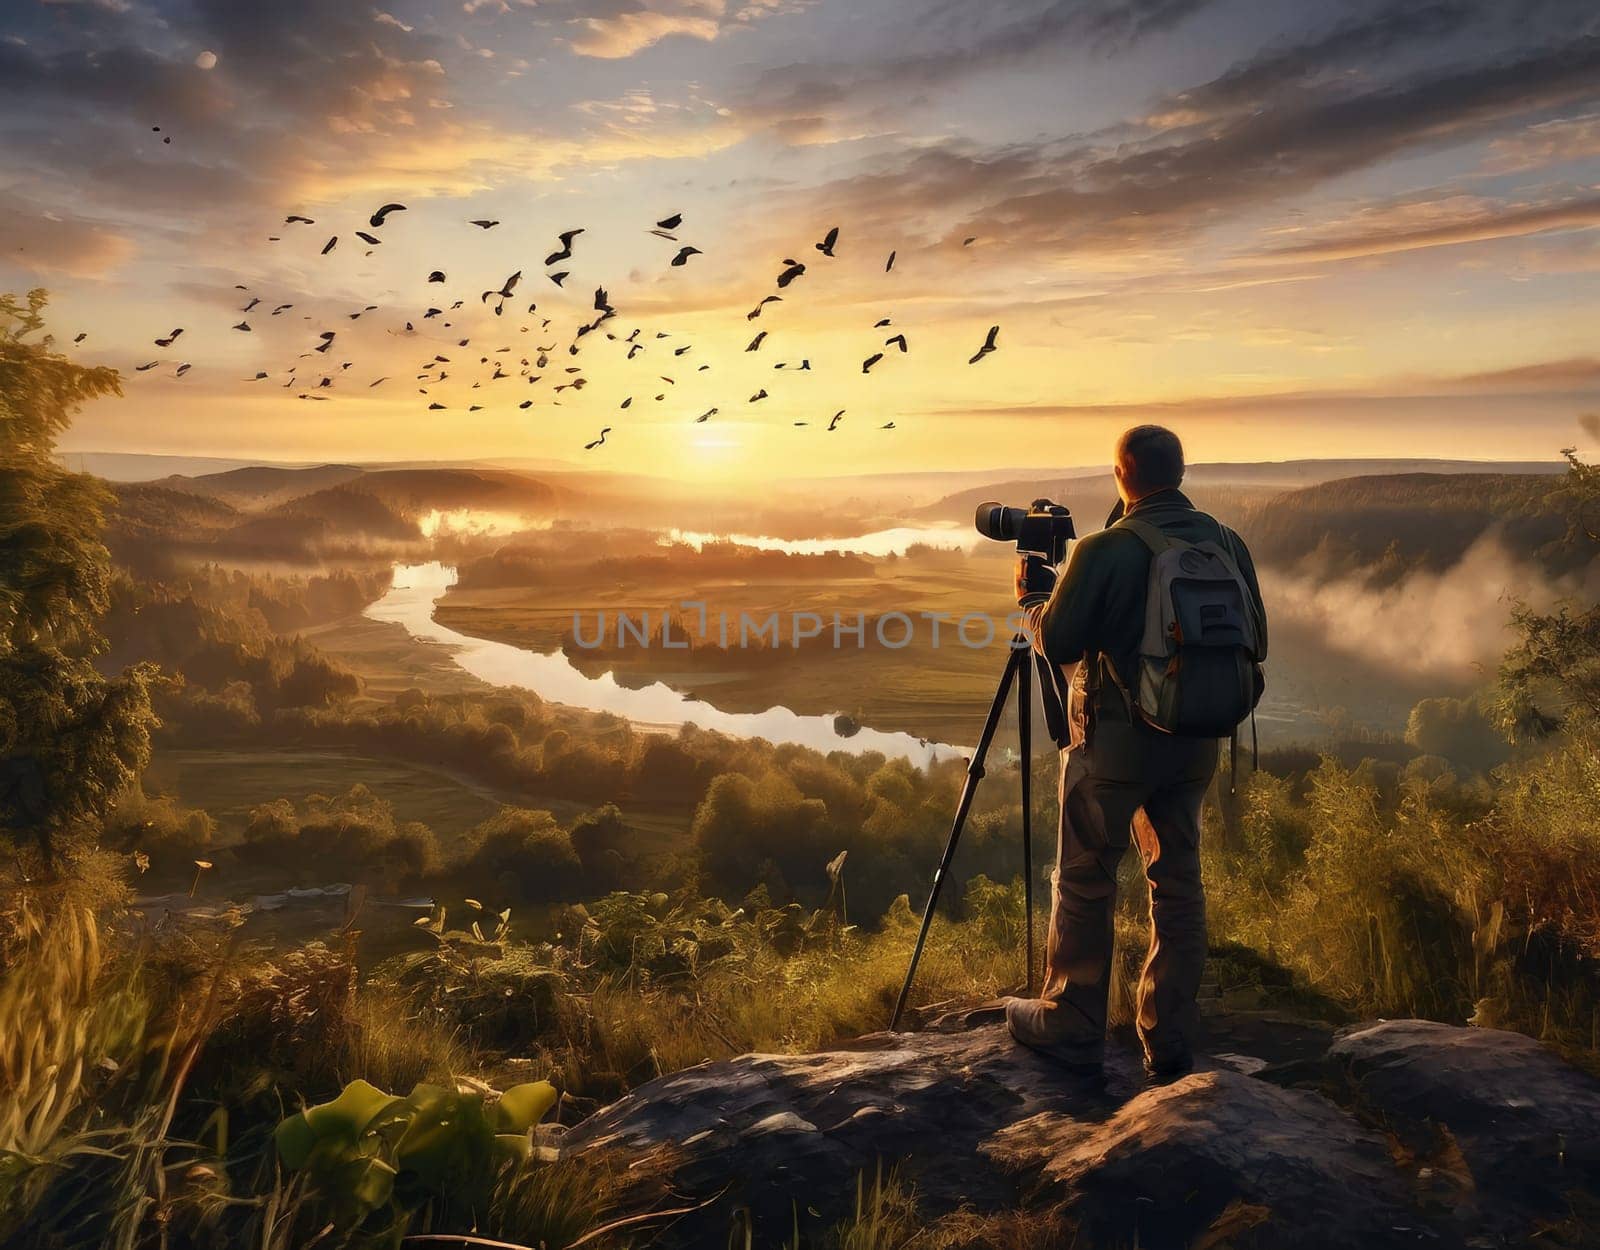 Birdwatcher on sunrise with tripod and camera take shot on birds. Amazing landscape and birdwatcher silhouette with camera. Wildlife photography concept